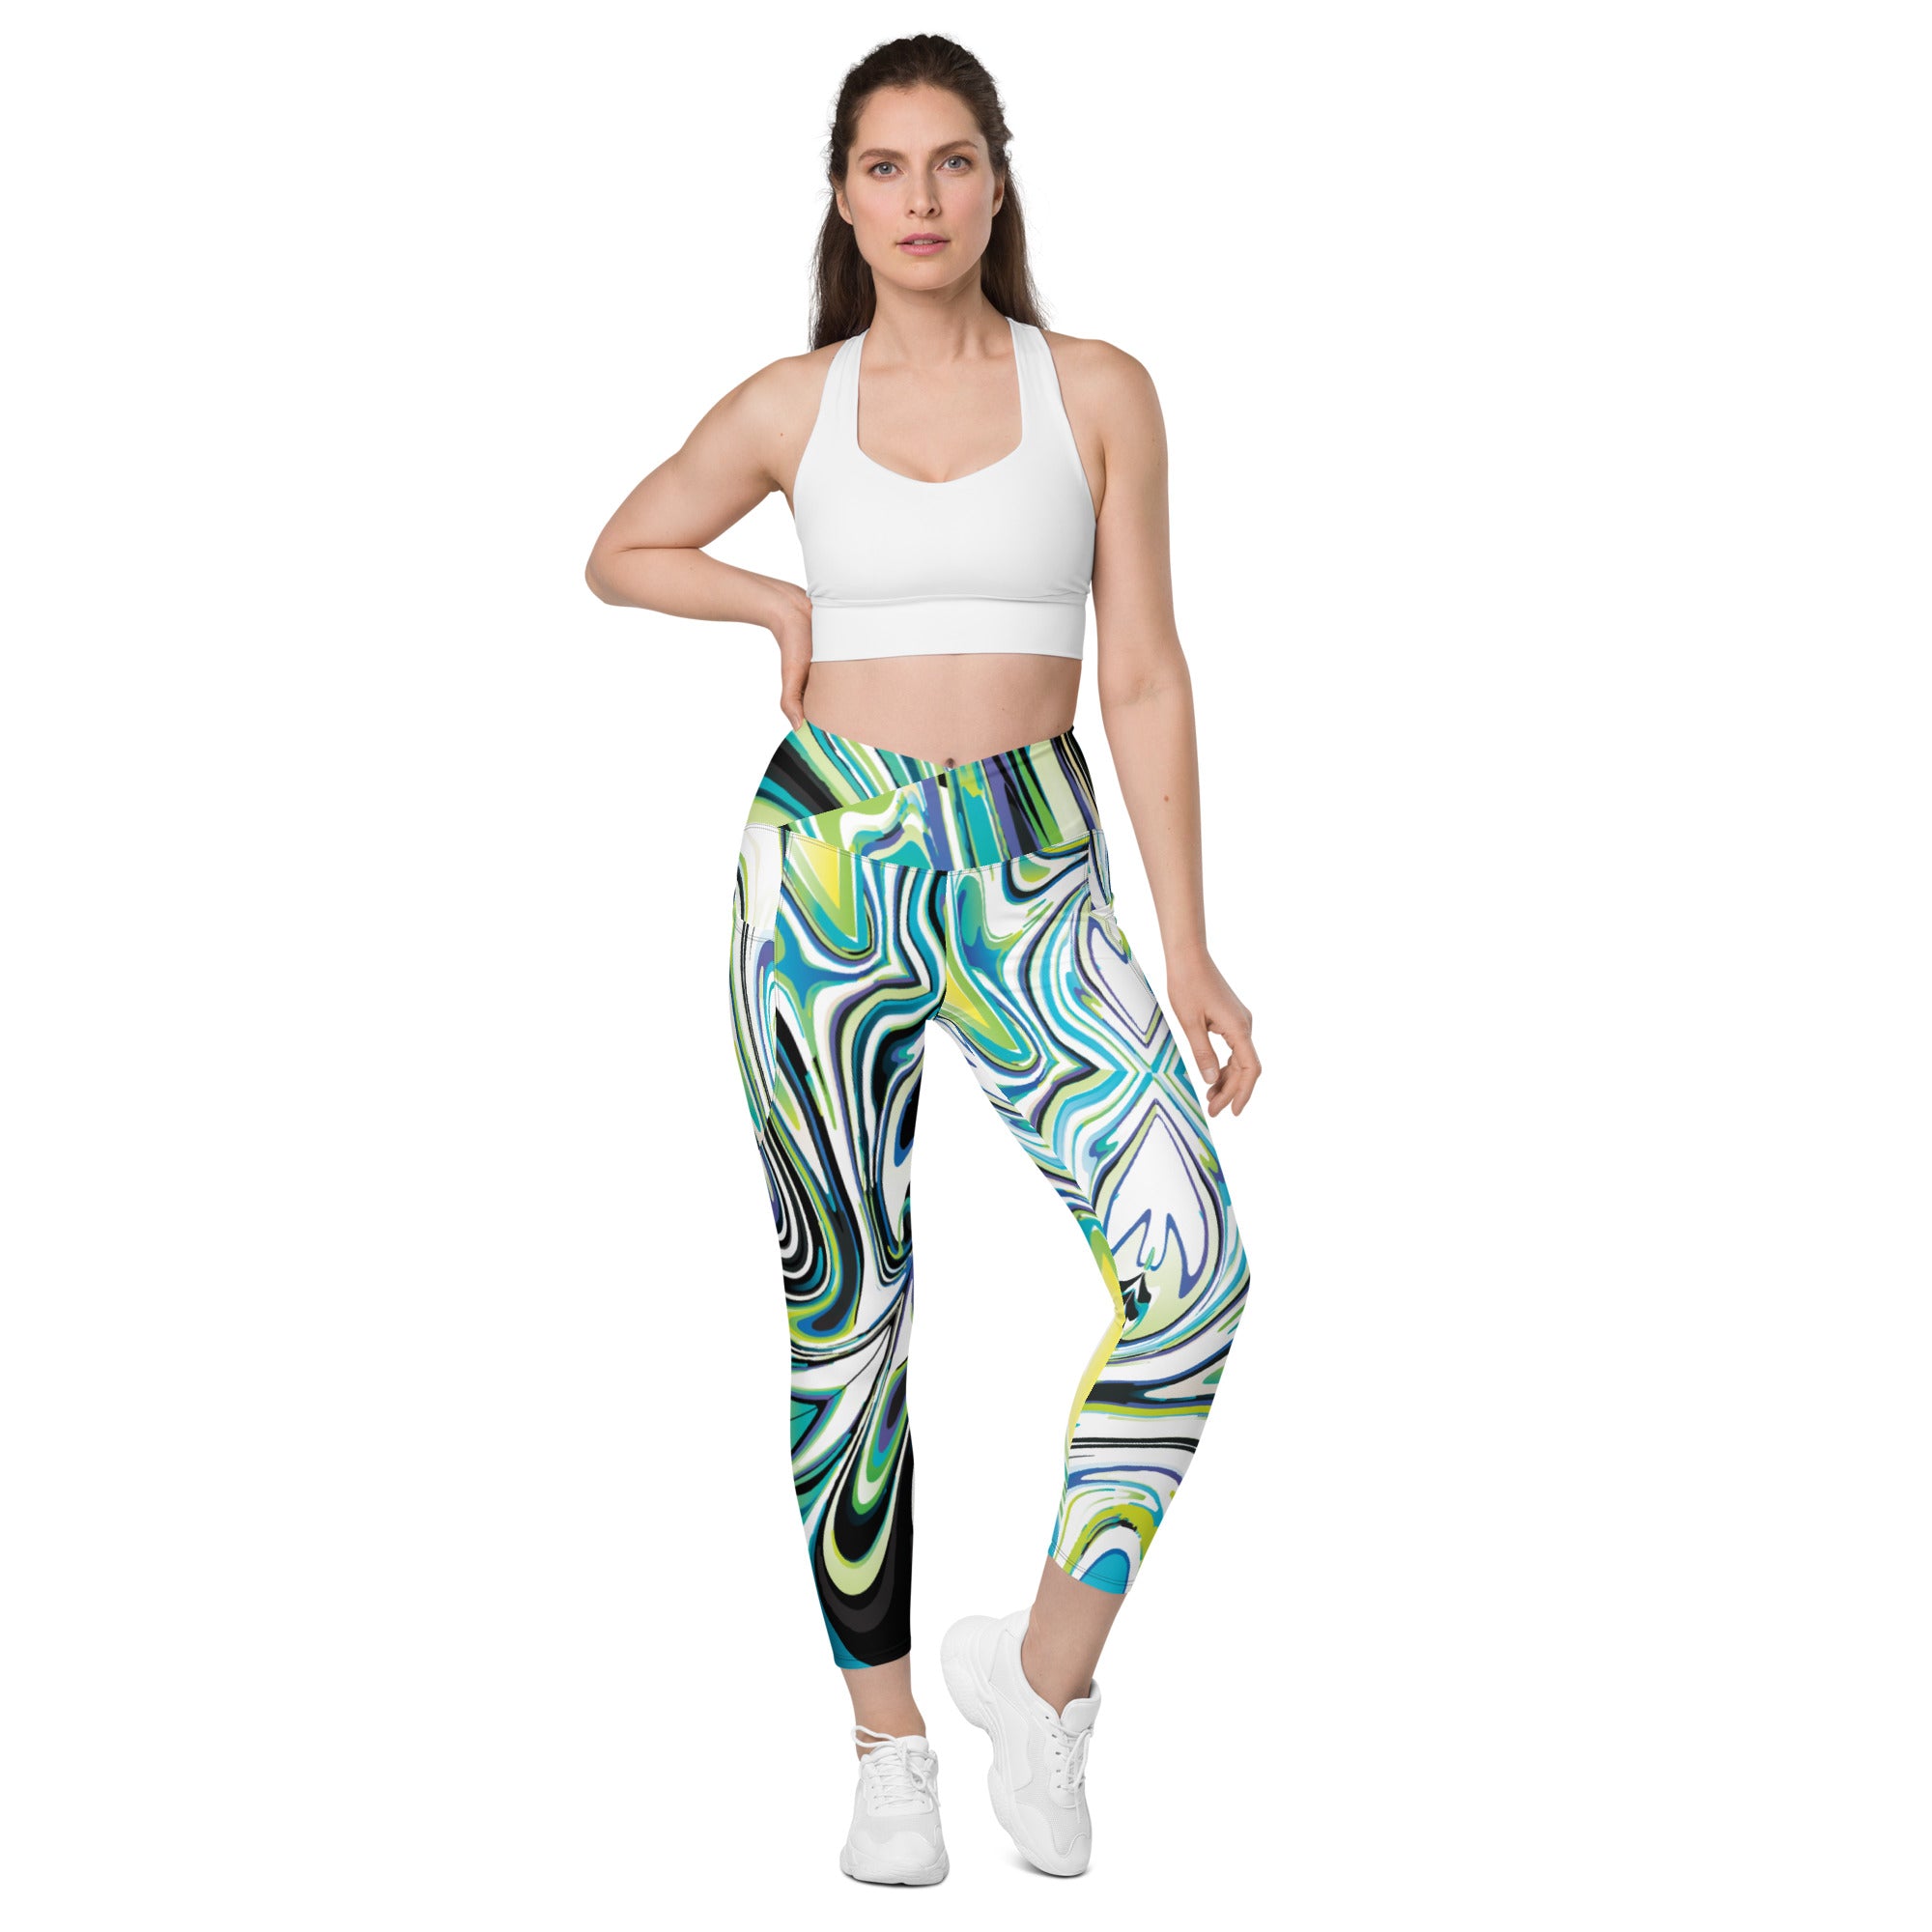 Madilce Women's Crossover Leggings with Pockets